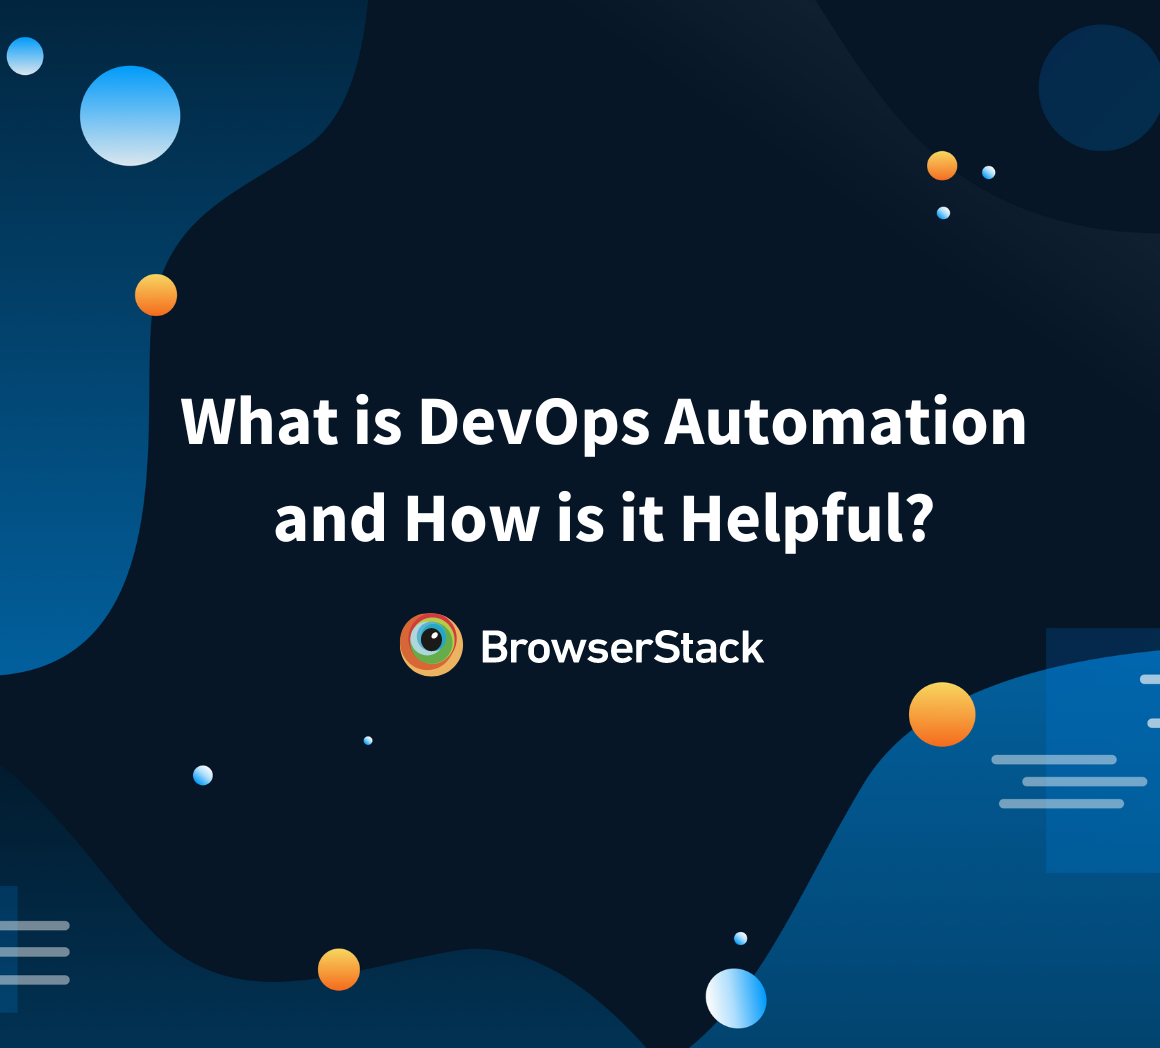 What is DevOps Automation and How is it Helpful